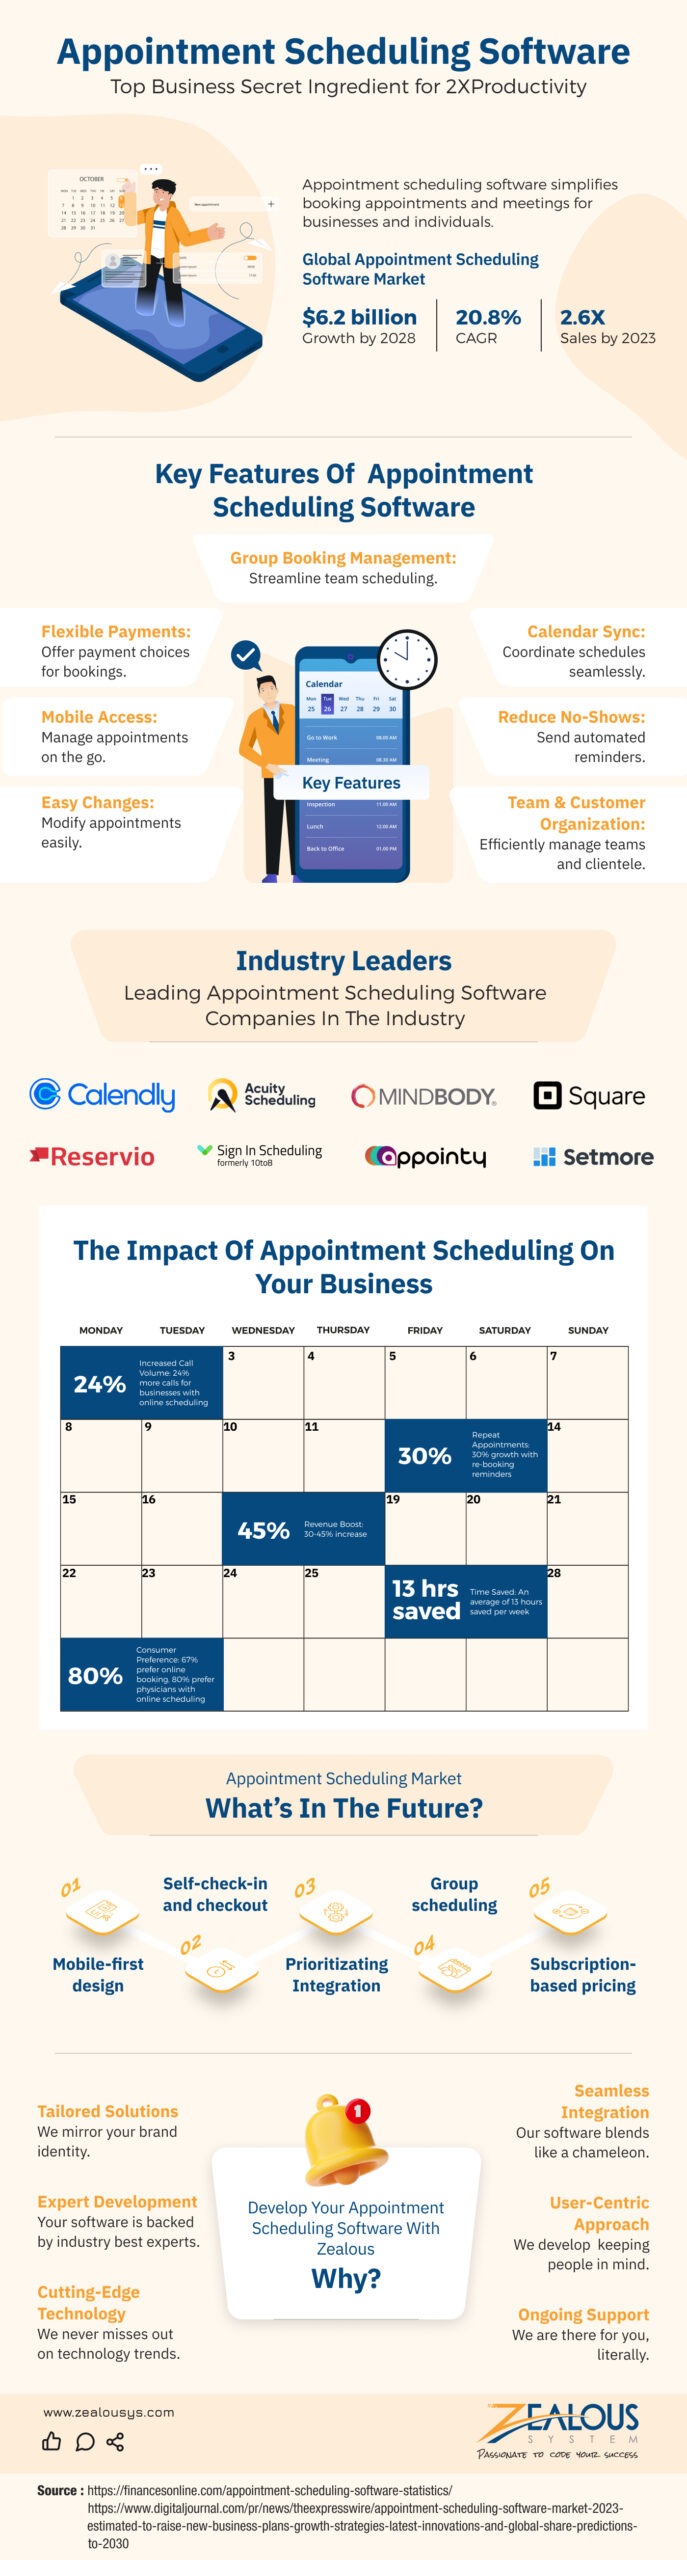 Infographic Appointment Scheduling Software